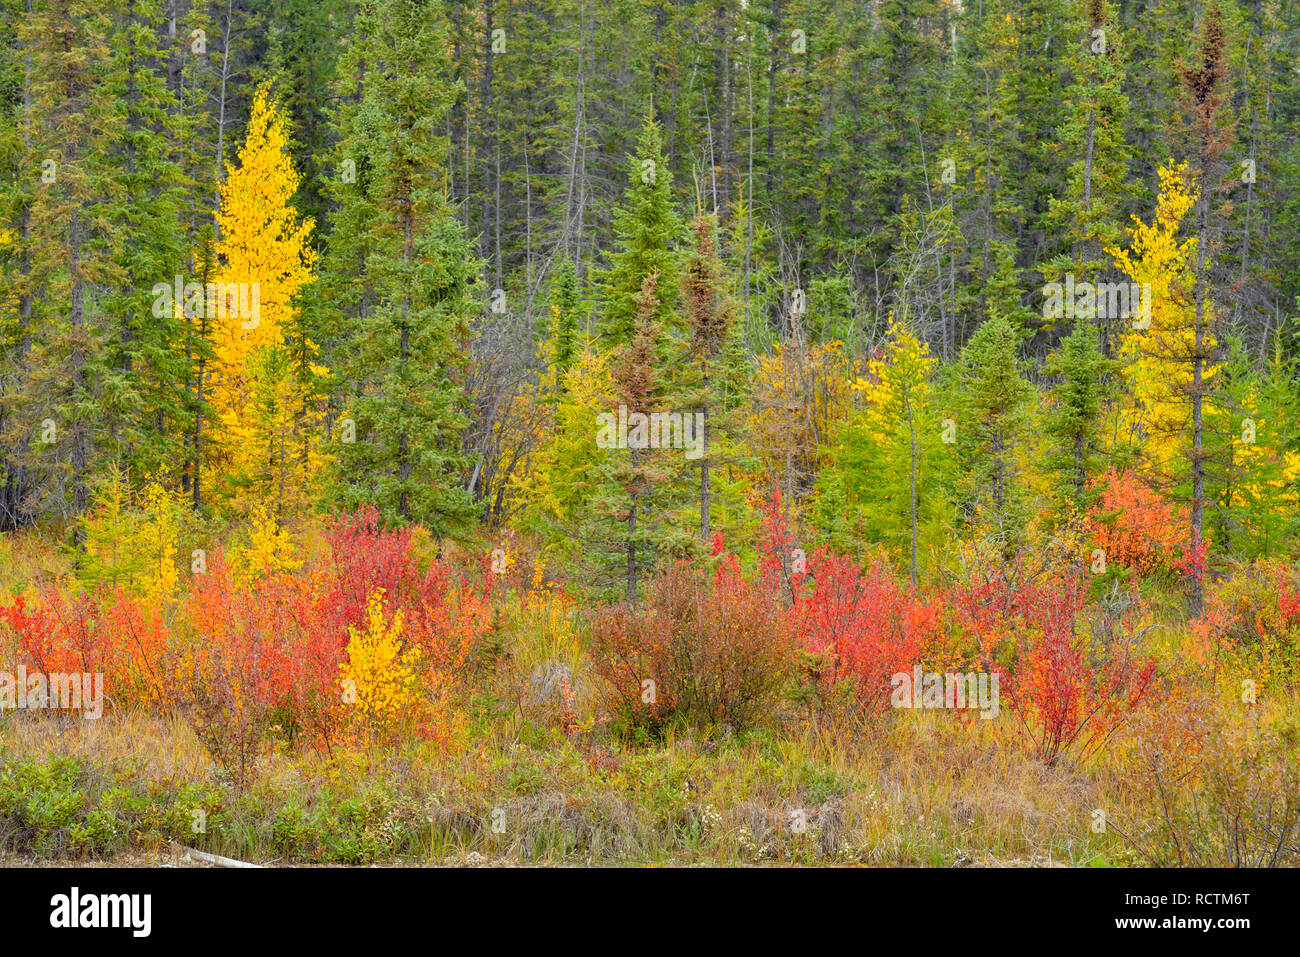 Dwarf birch, aspen and spruce, Hwy 3 North to Yellowknife, Northwest Territories, Canada Stock Photo